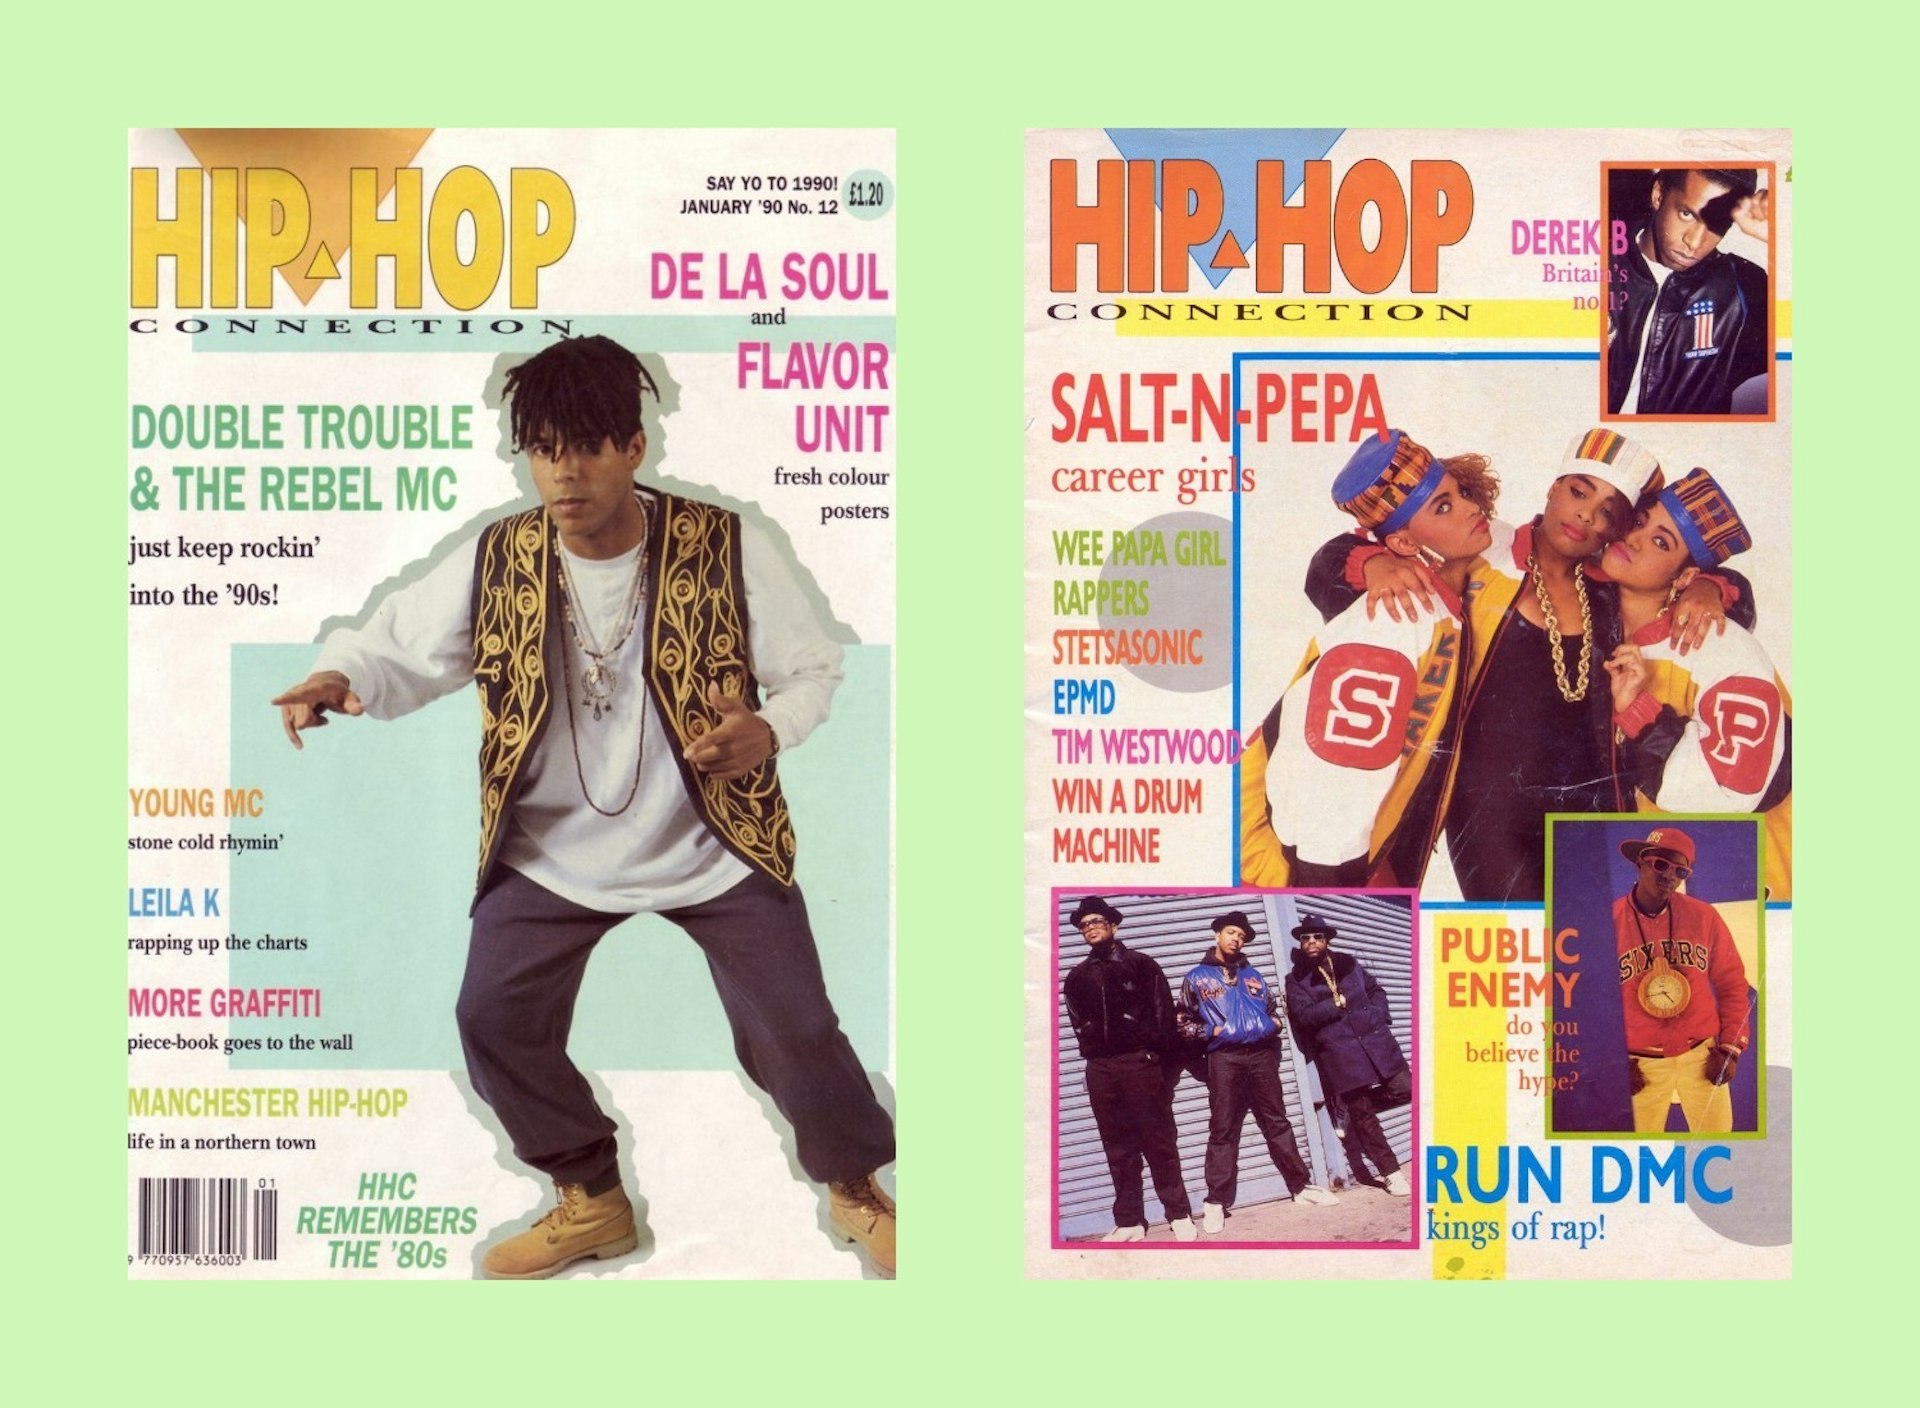 How hip hop magazines shaped UK rap as we know it